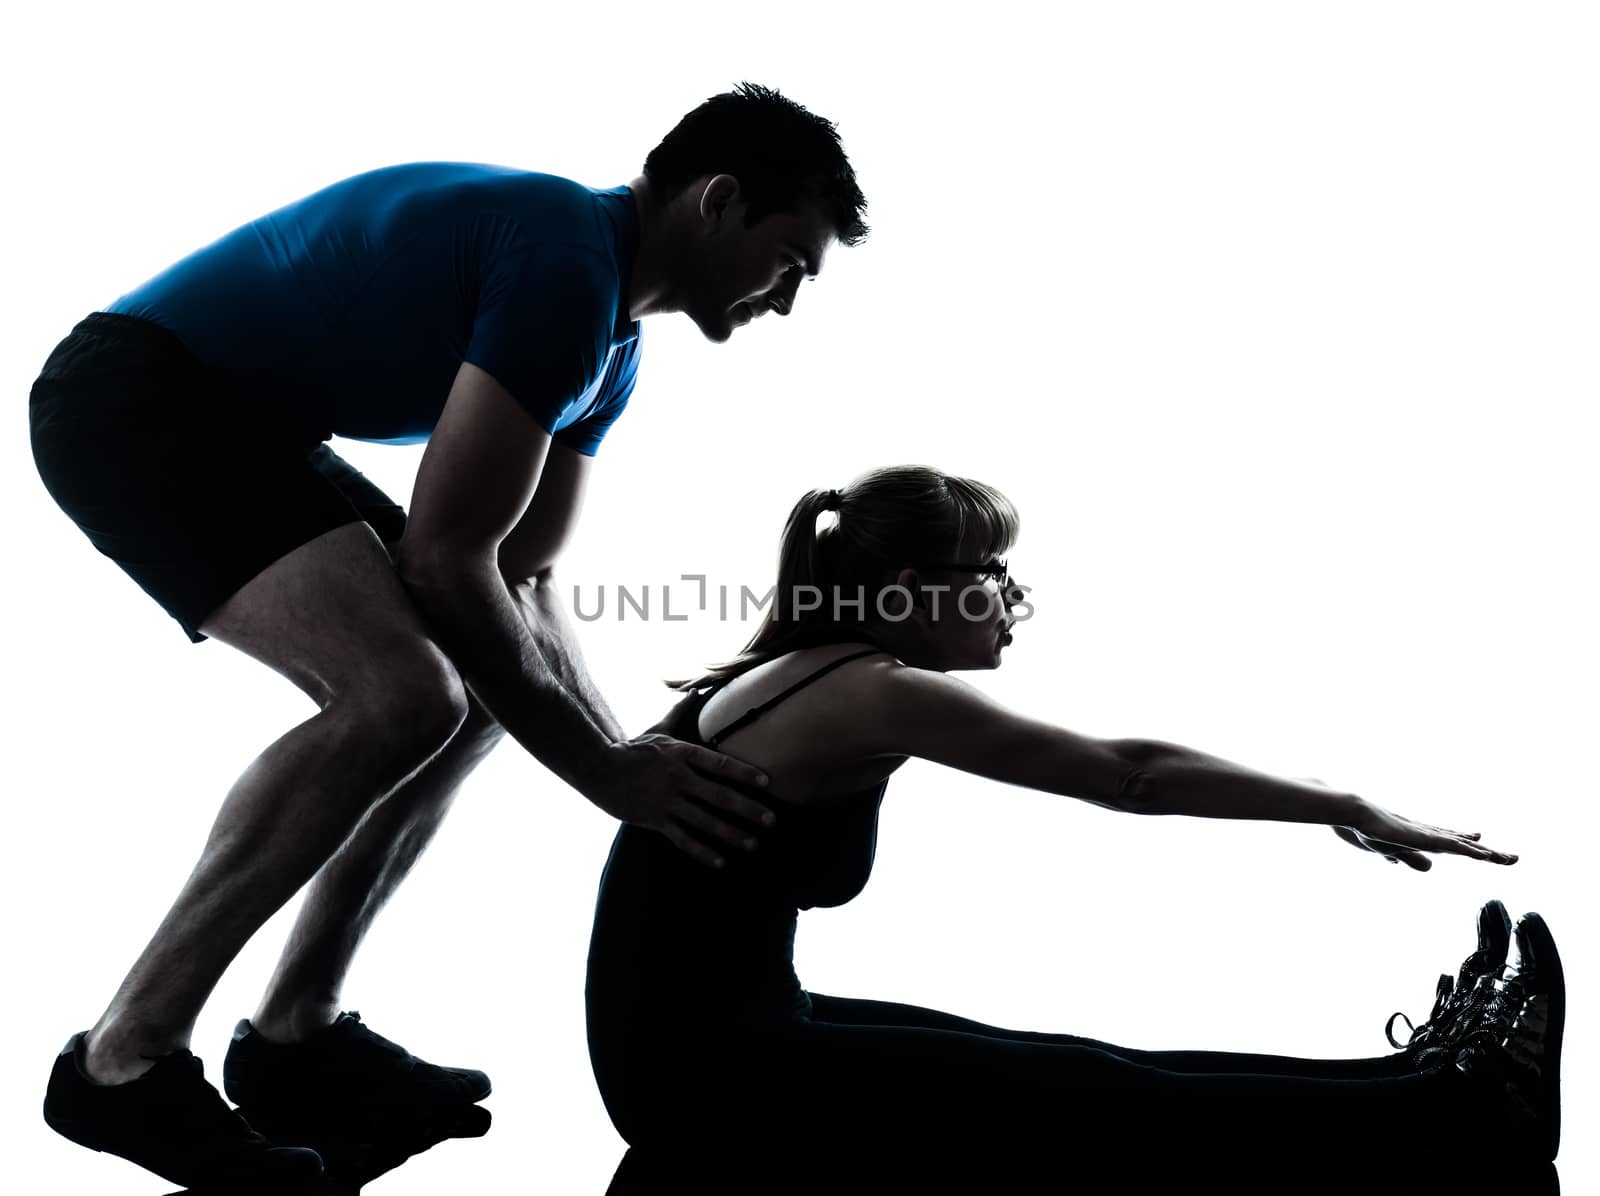 caucasian aerobics instructor with mature woman exercising fitness workout in silhouette studio isolated on white background